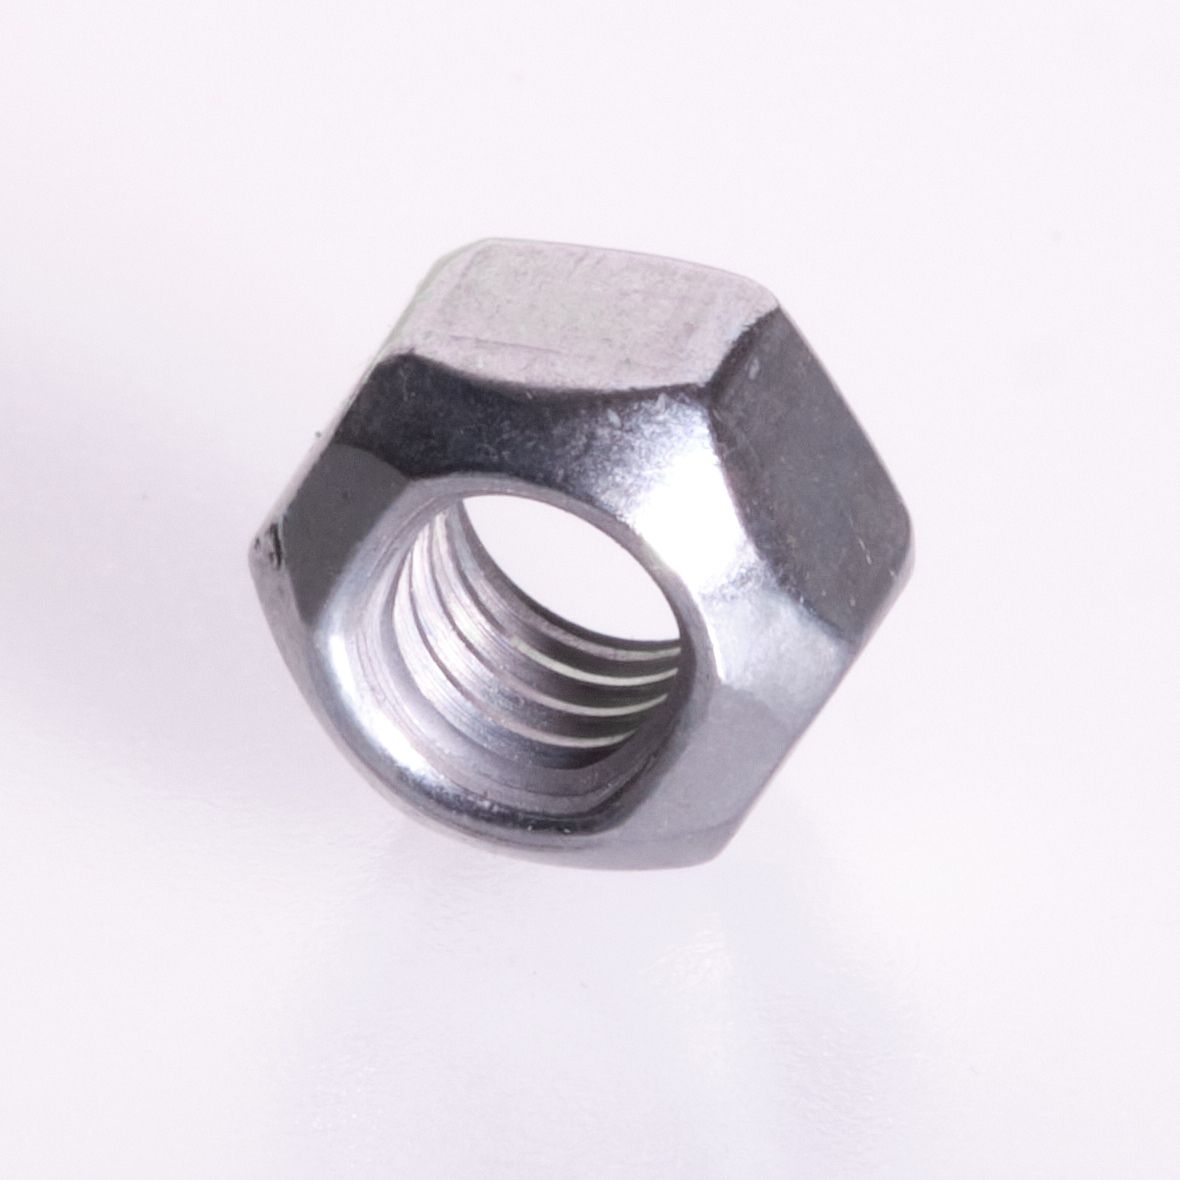 DIN clamping nut